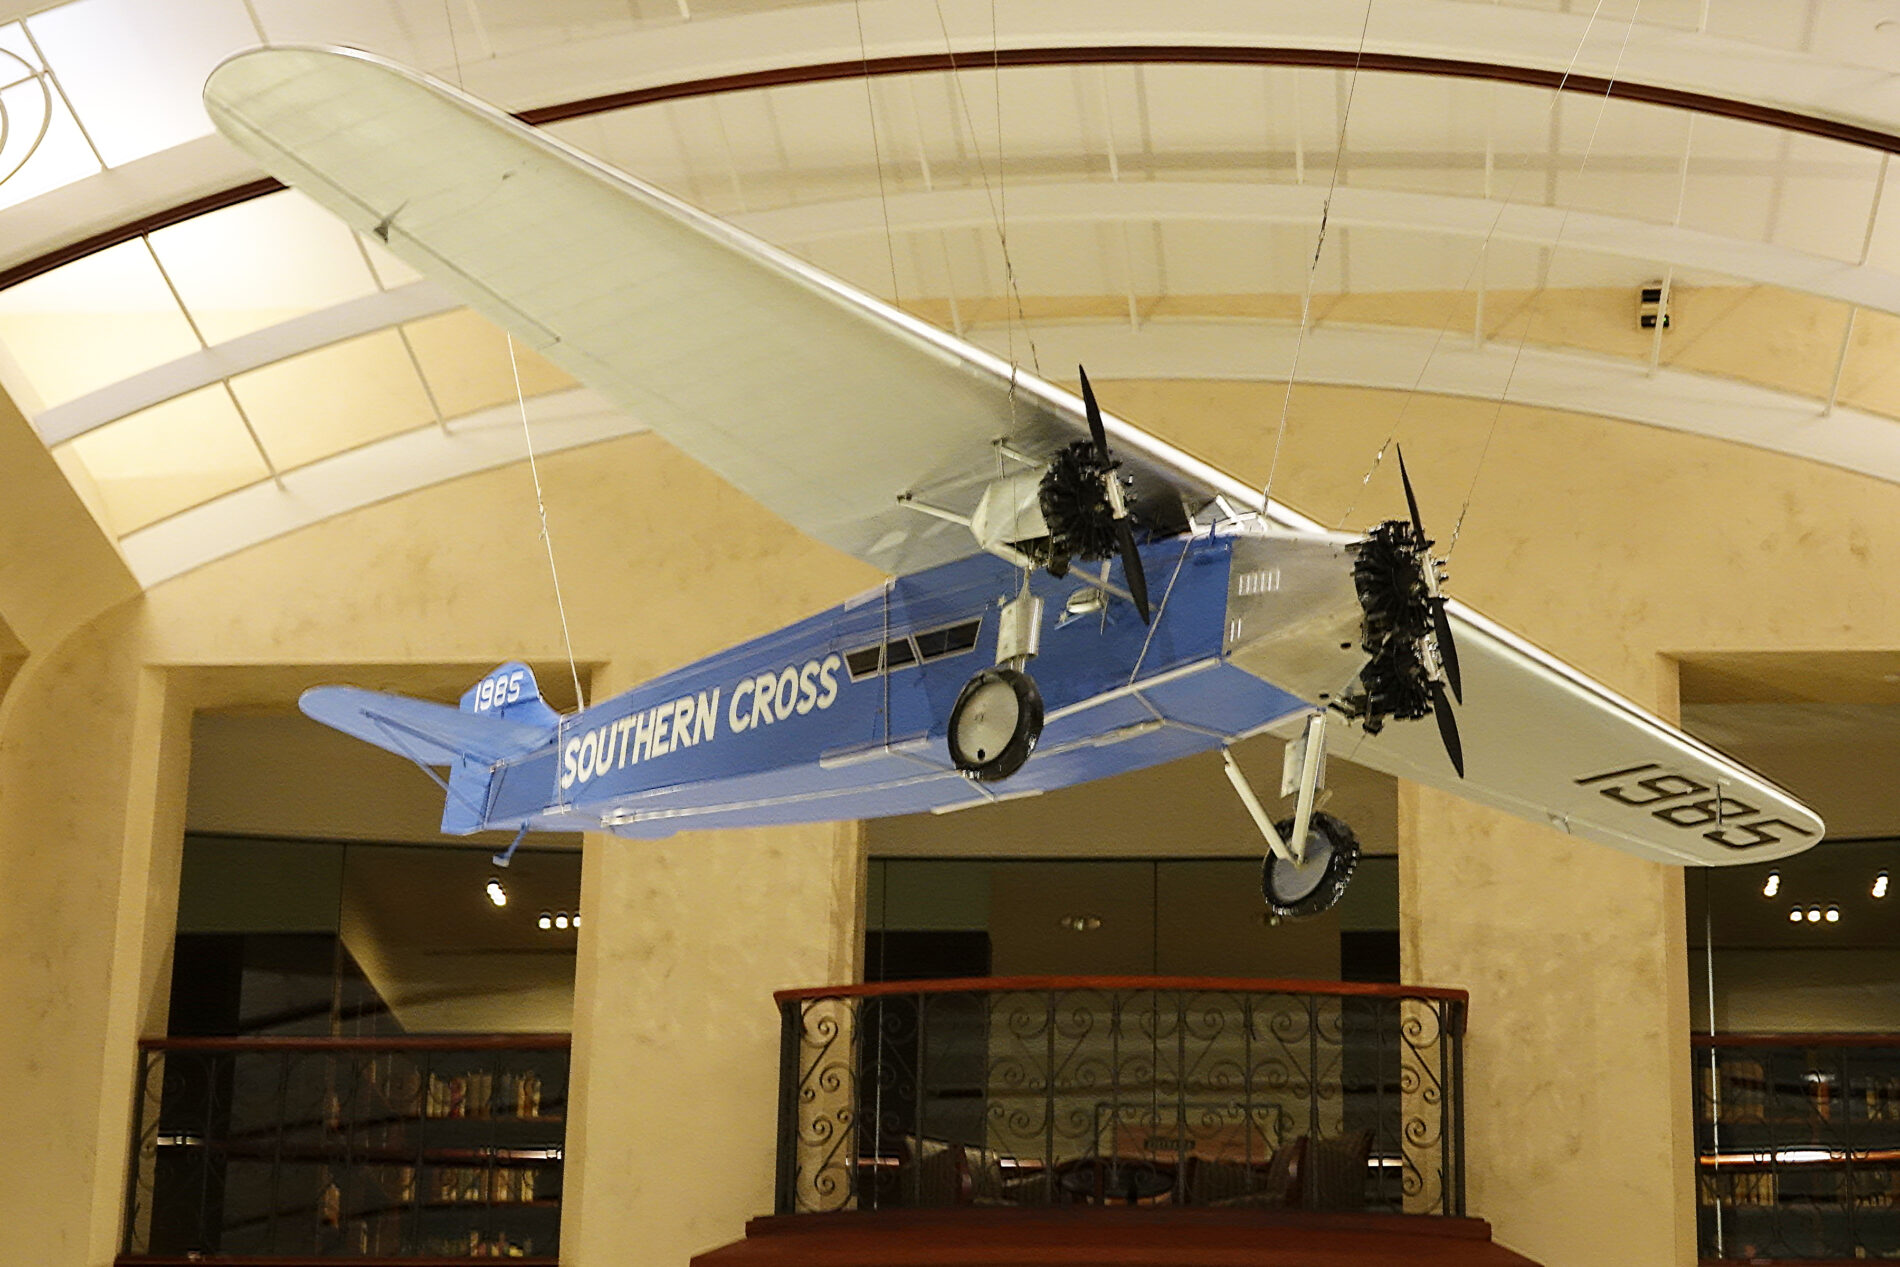 Model of Southern Cross, the plane flown in 1928 on the first transpacific flight. It is in San Francisco Aviation Museum.